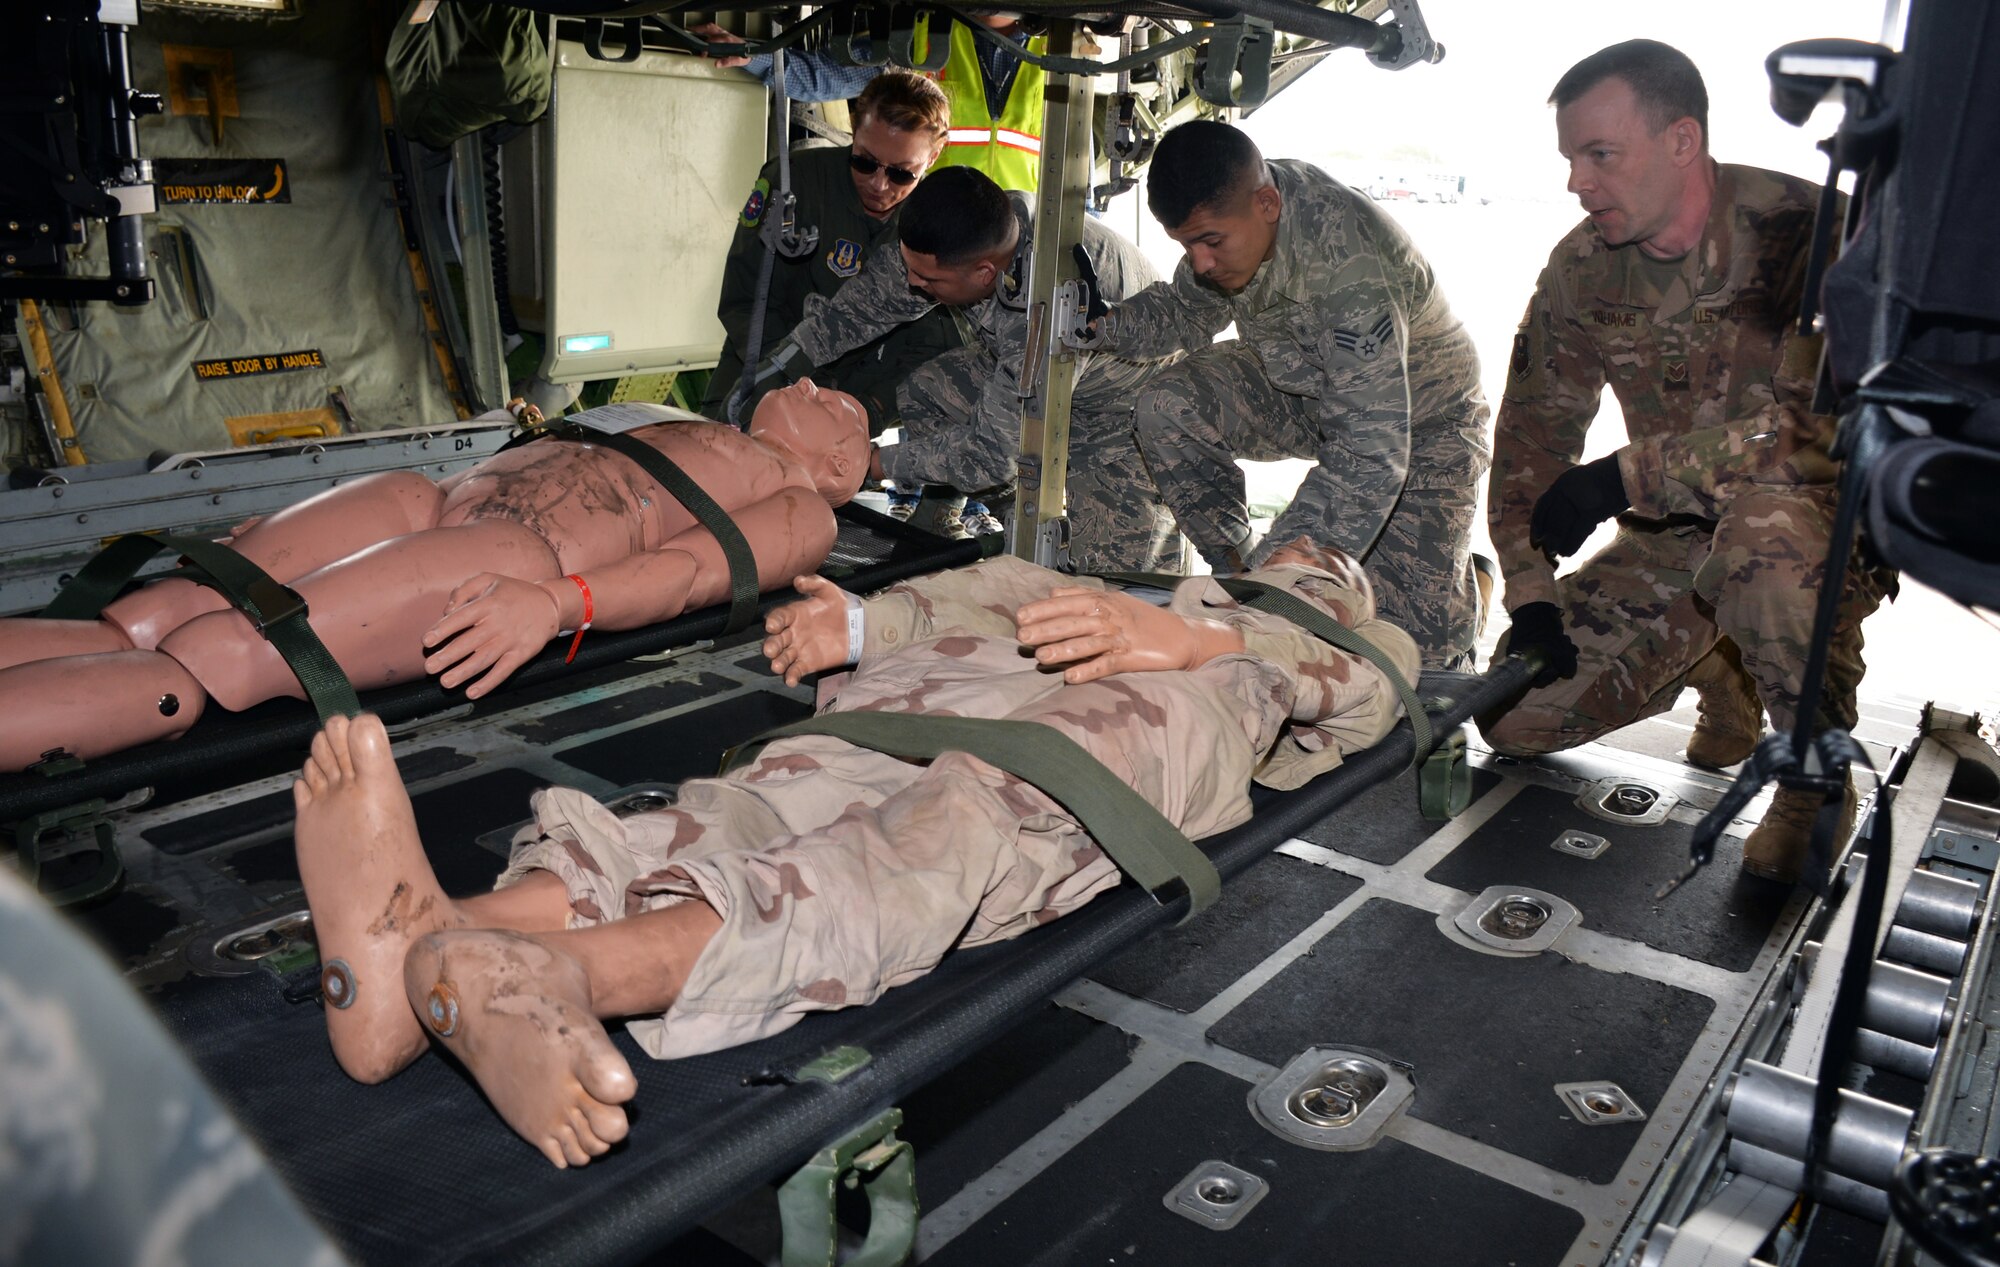 59th Medical Wing and 433rd Aeromedical Evacuation Squadron personnel load simulated patients into litter stanchions in a C-130H Hercules during a National Disaster Medical System exercise at Joint Base San Antonio-Lackland March 20.